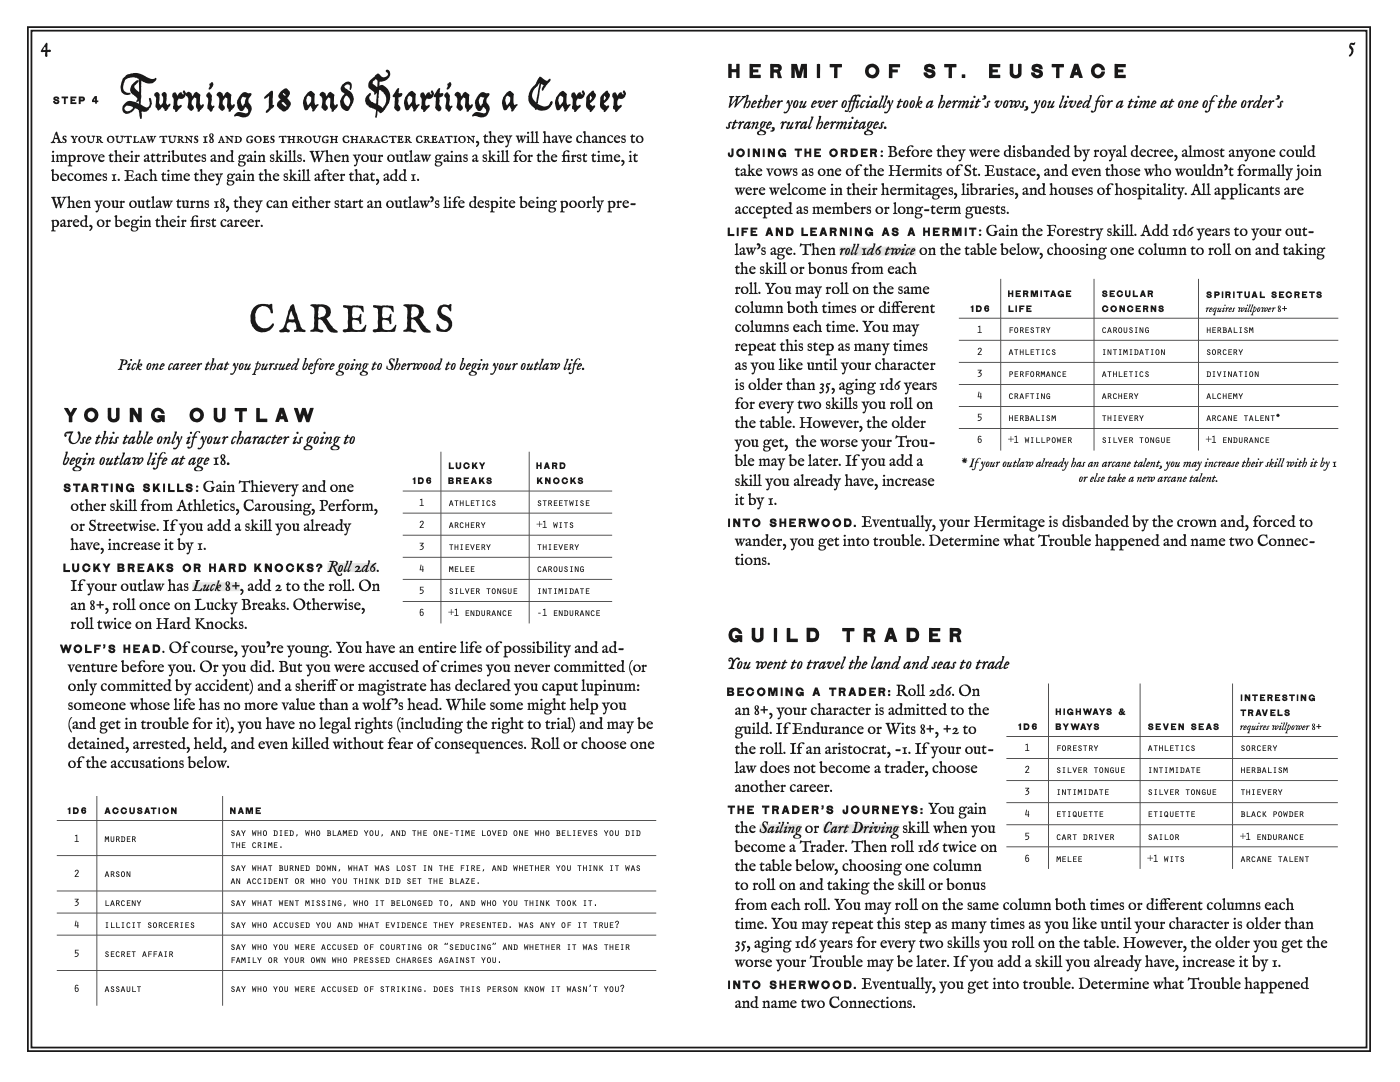 Sample layout of the first three career options